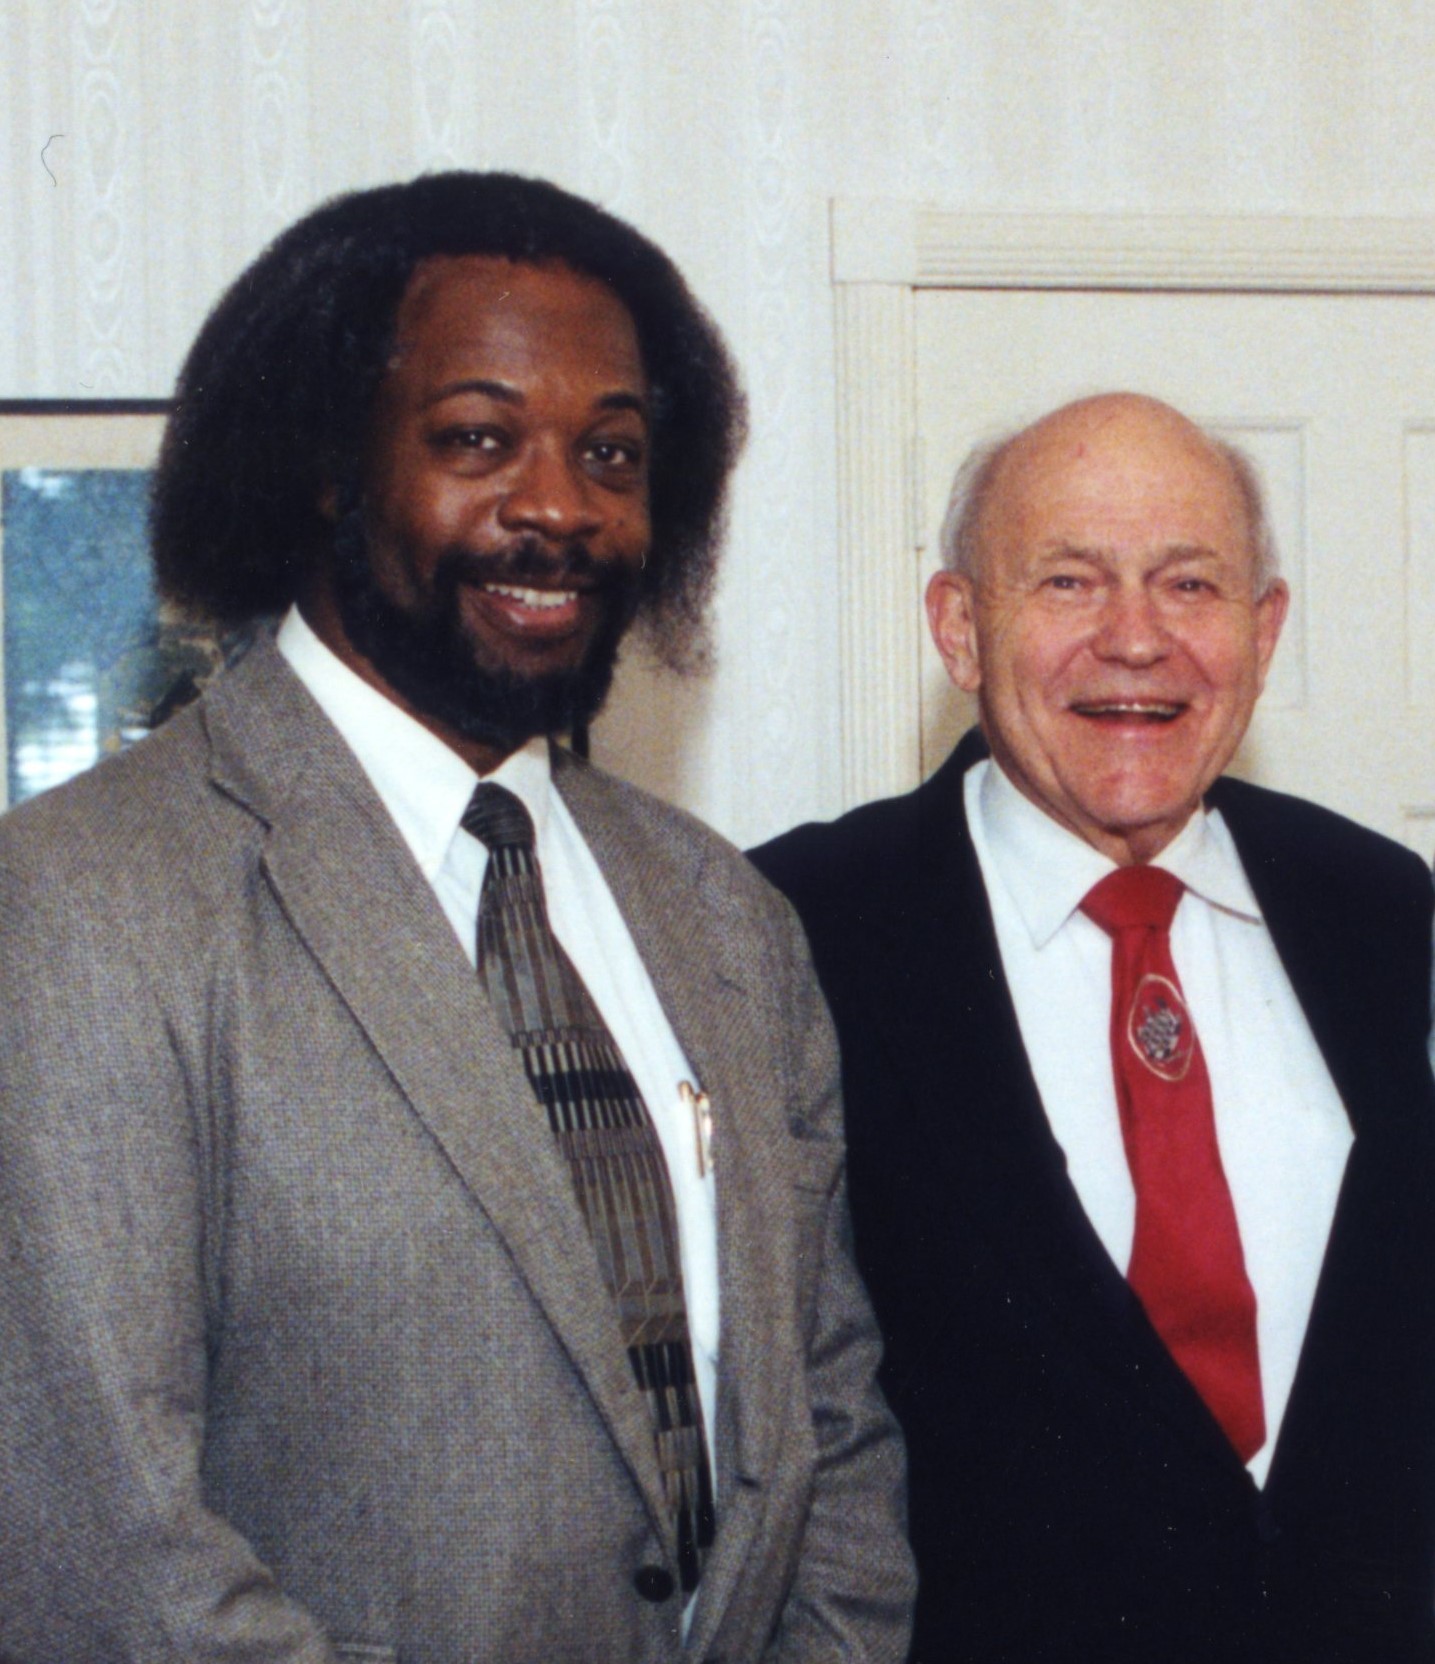 Jim Gates and John Toll in 2001.